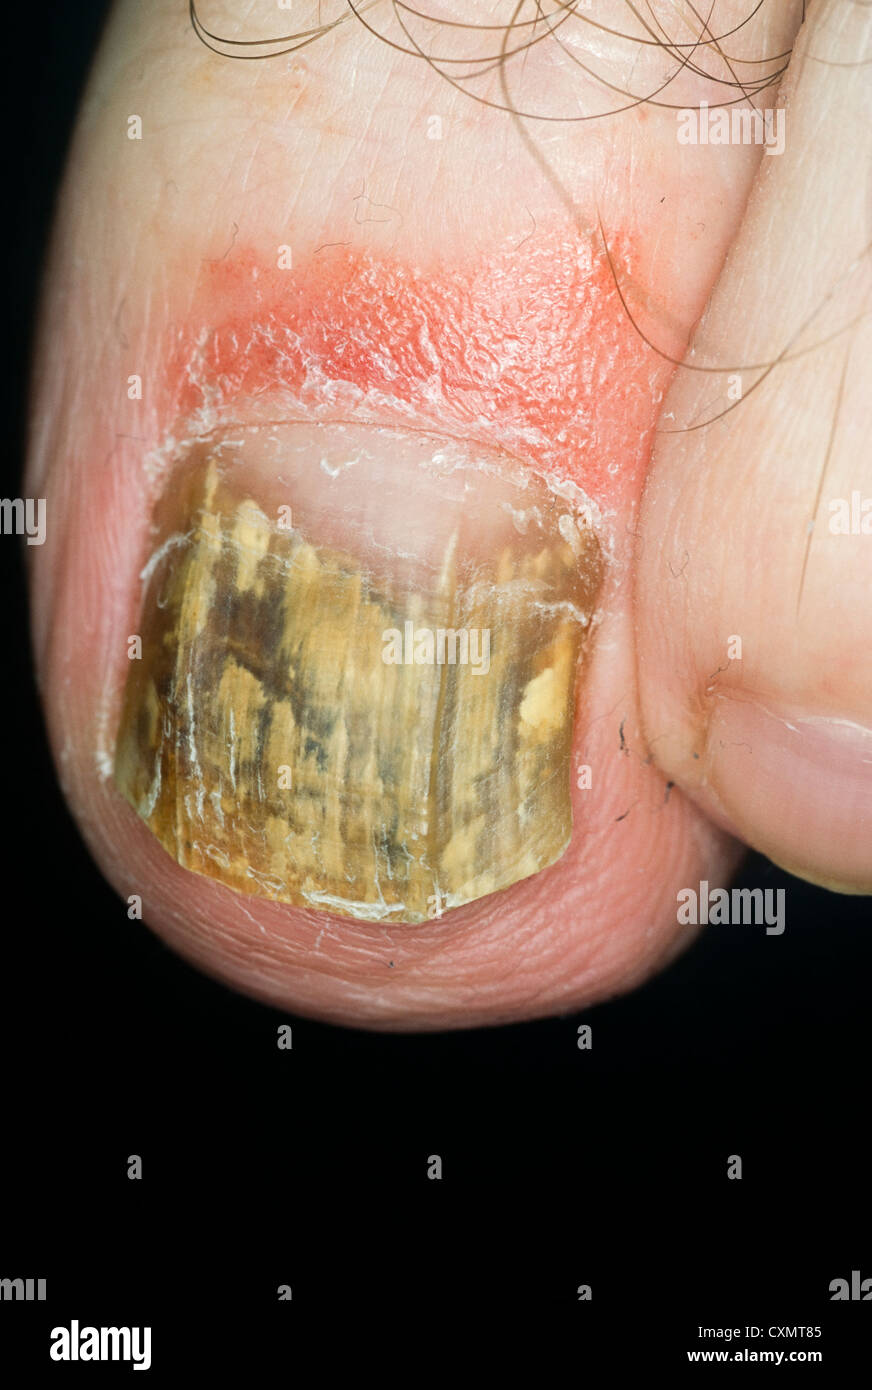 Fungal nail infection of hallux with discolouration, thickening & some distortion -MODEL RELEASED Stock Photo